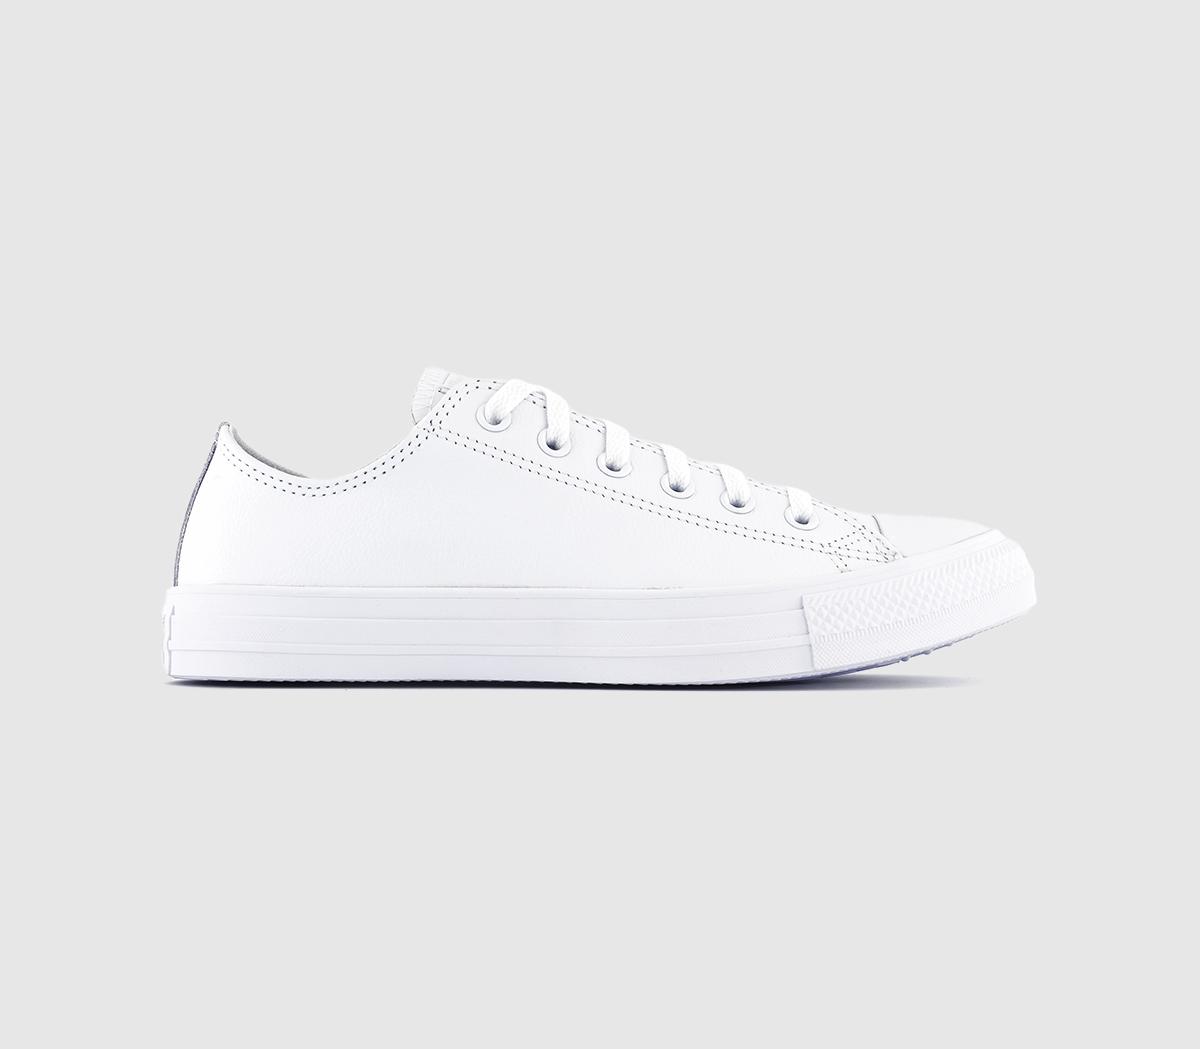 Ni Lily trussel Converse All Star Low Leather Trainers White Mono Leather - Unisex Sports